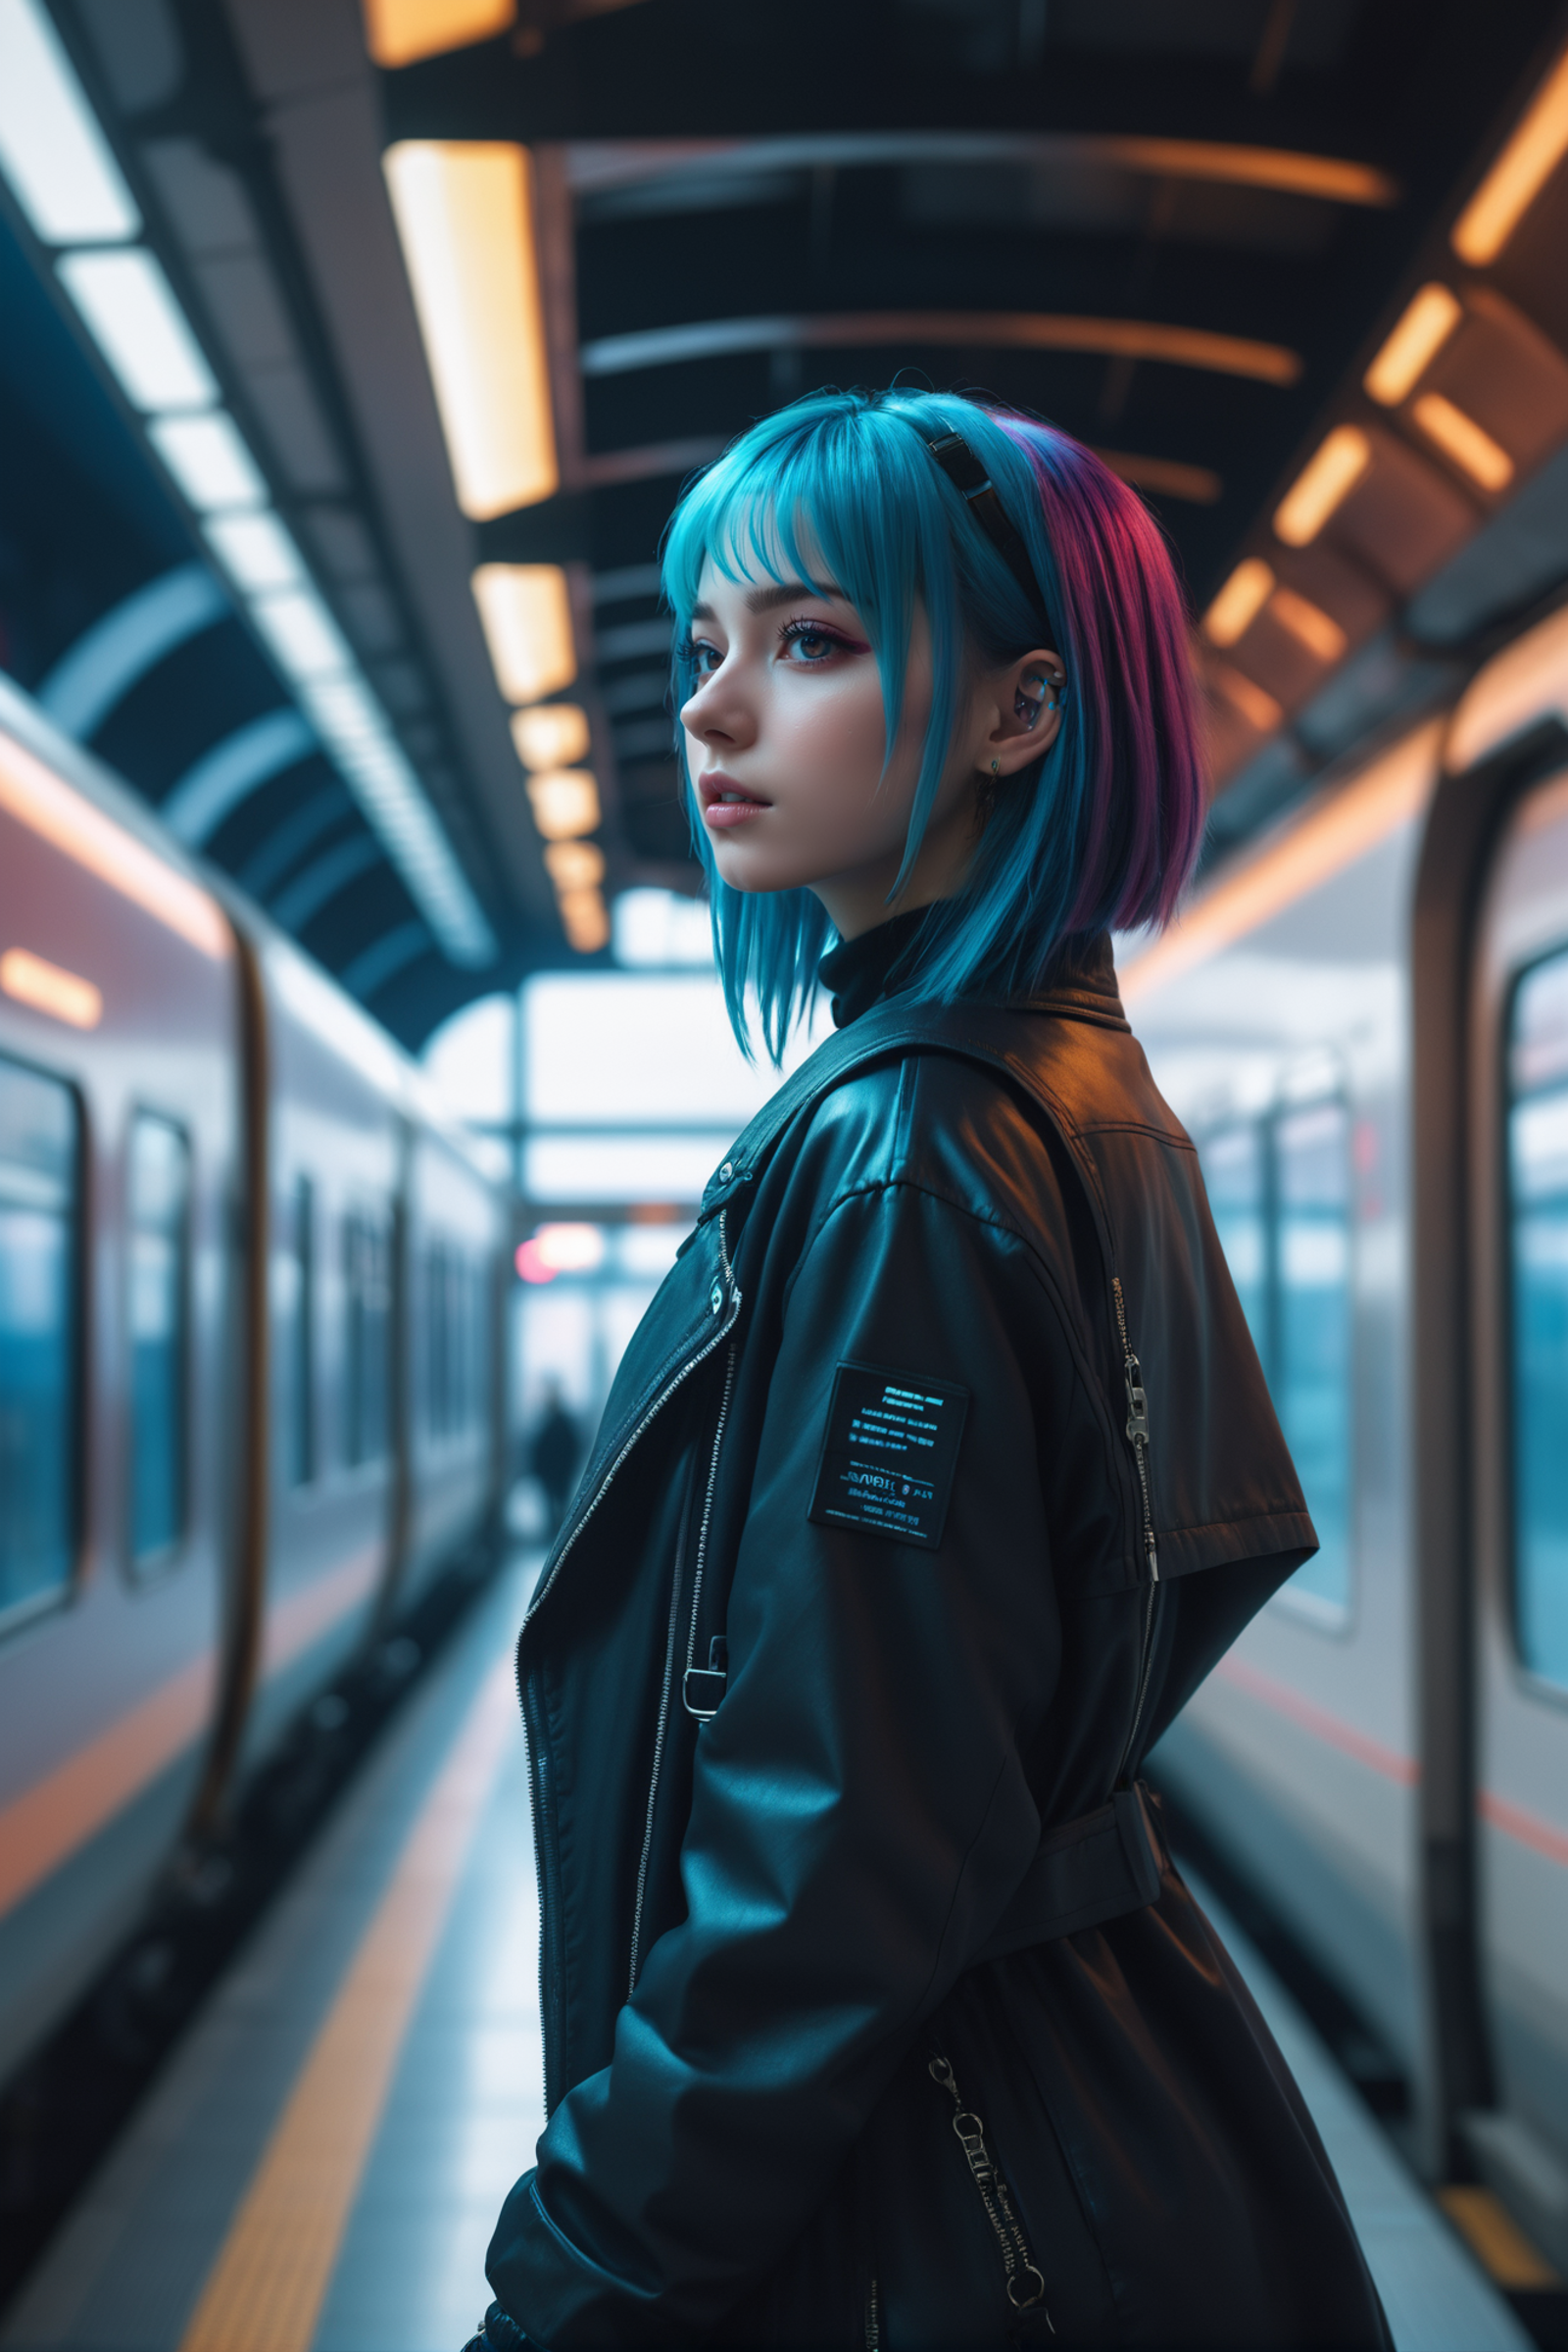 A woman in a black coat is standing in a train station with a purple and blue hair.